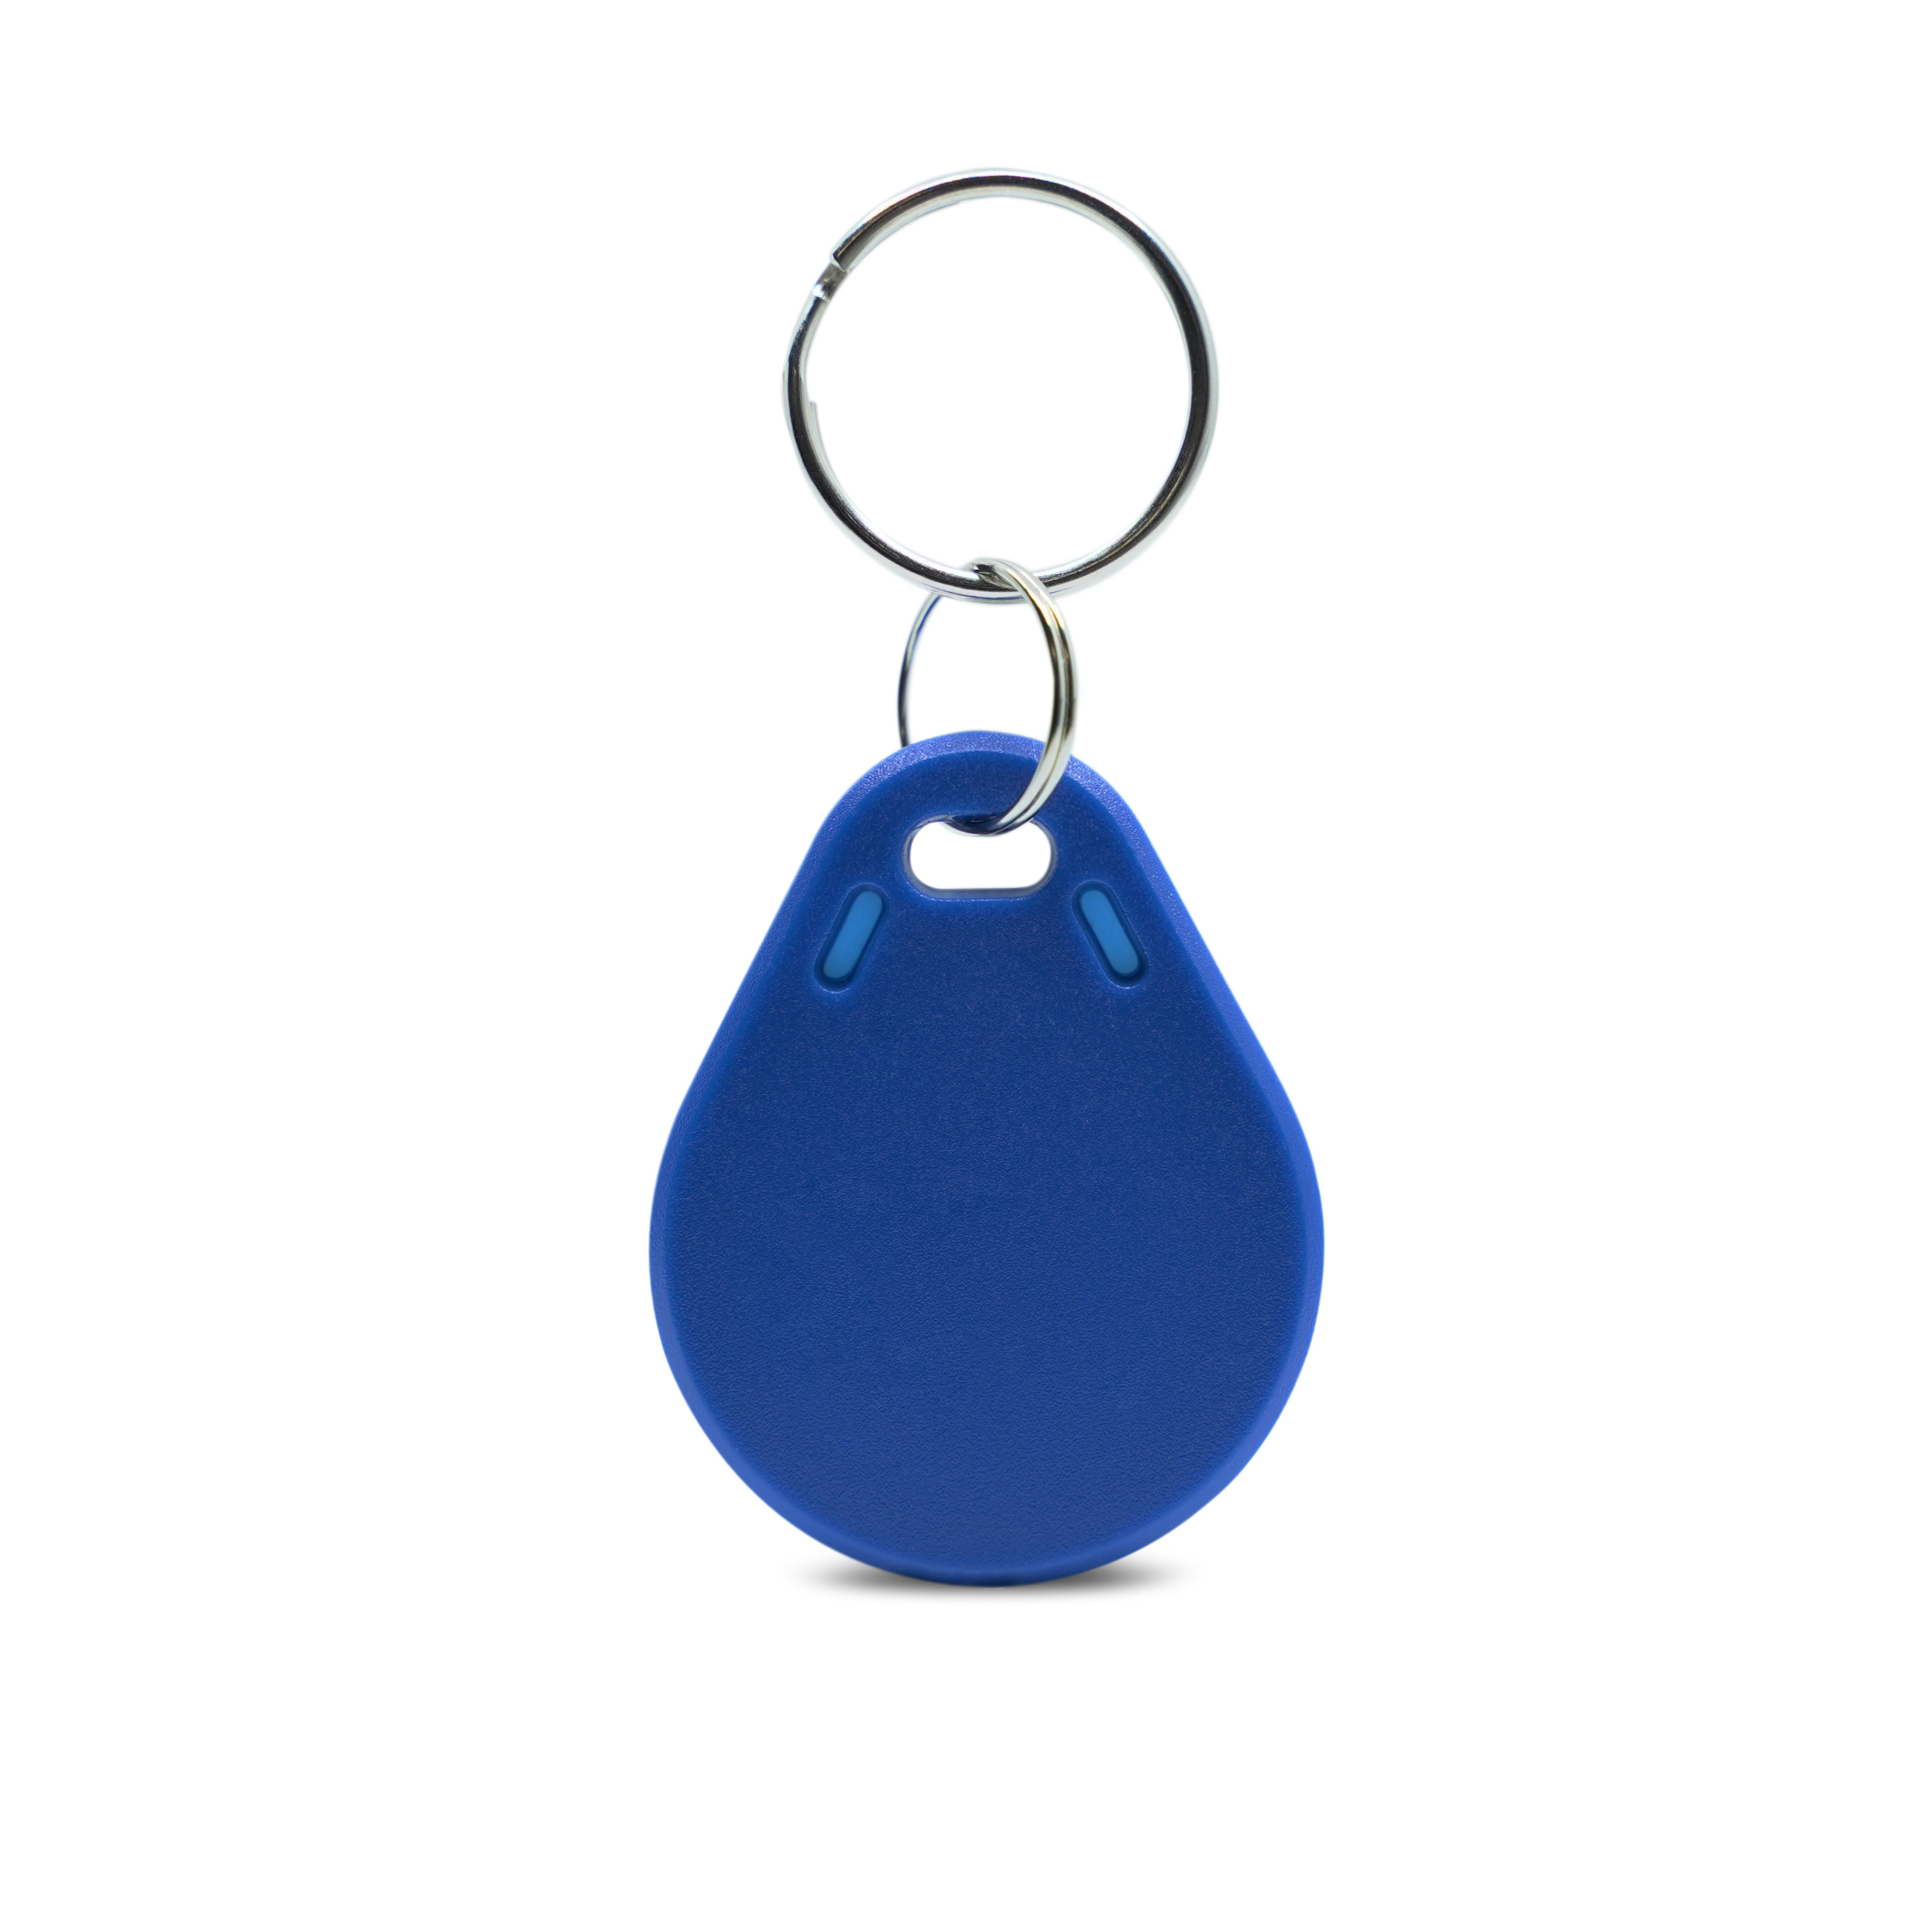 NFC tag ABS - 40 x 32 mm - MIFARE Classic 1k - 1024 Byte - blue